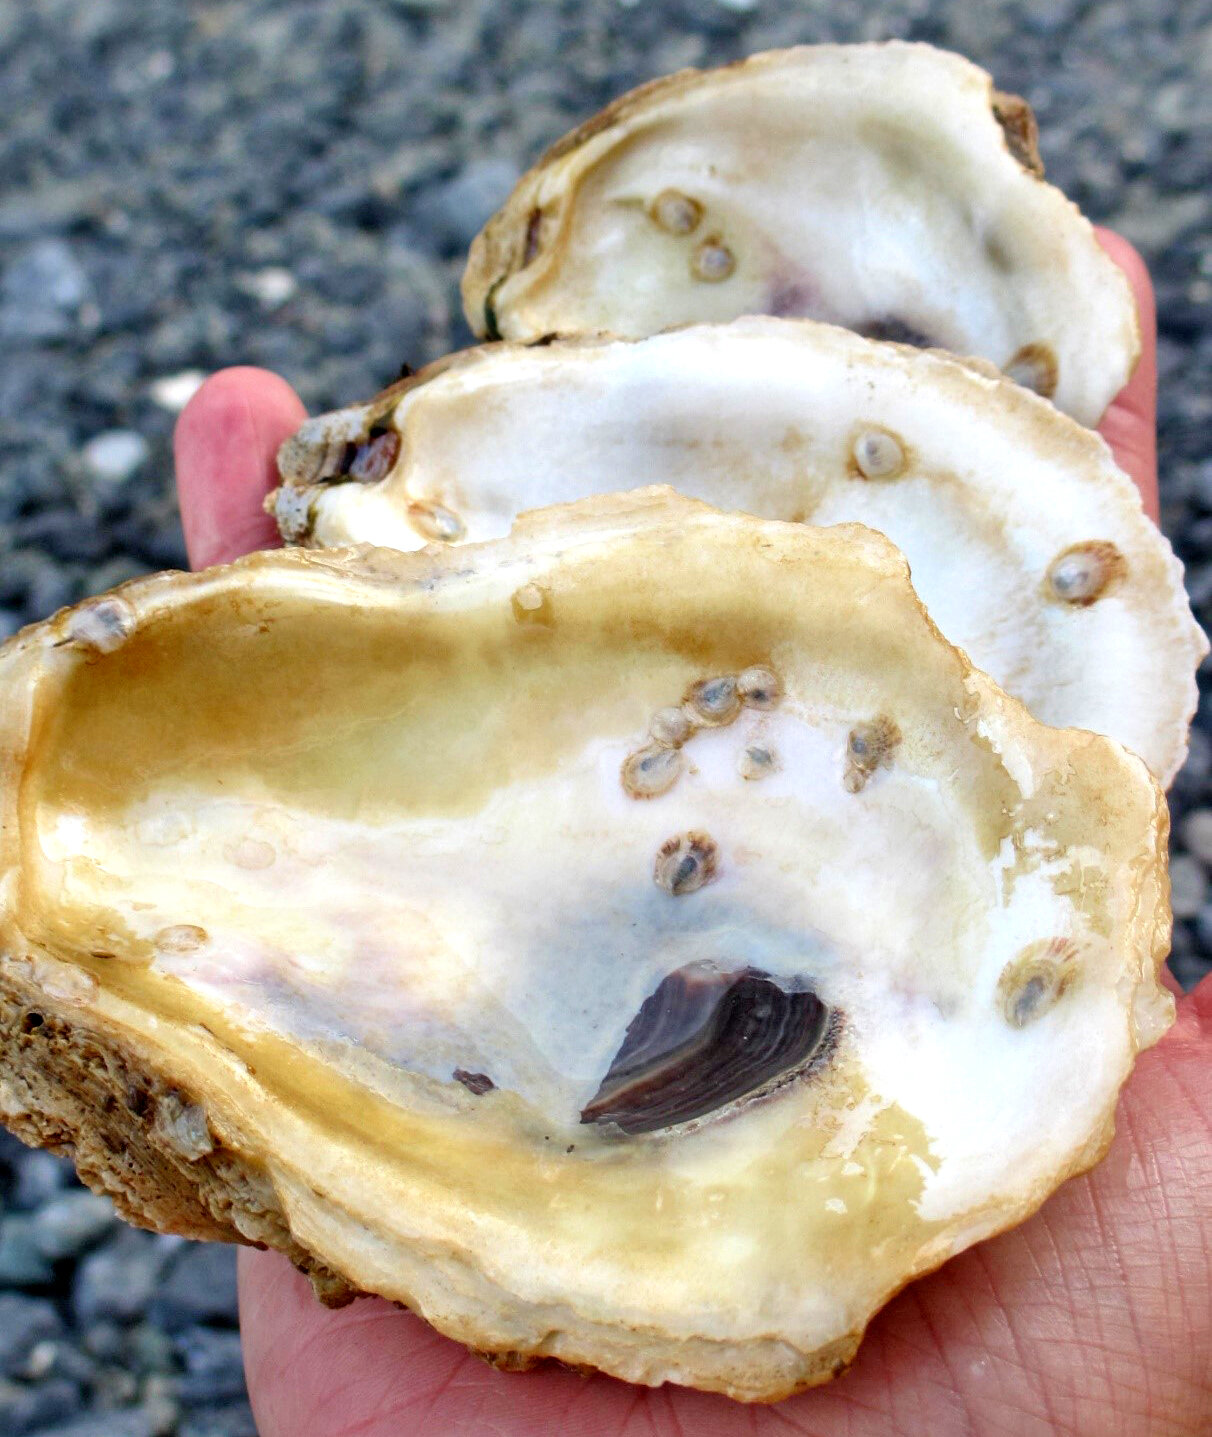 Oyster spat, or juvenile oysters, are seen attached to these shells.